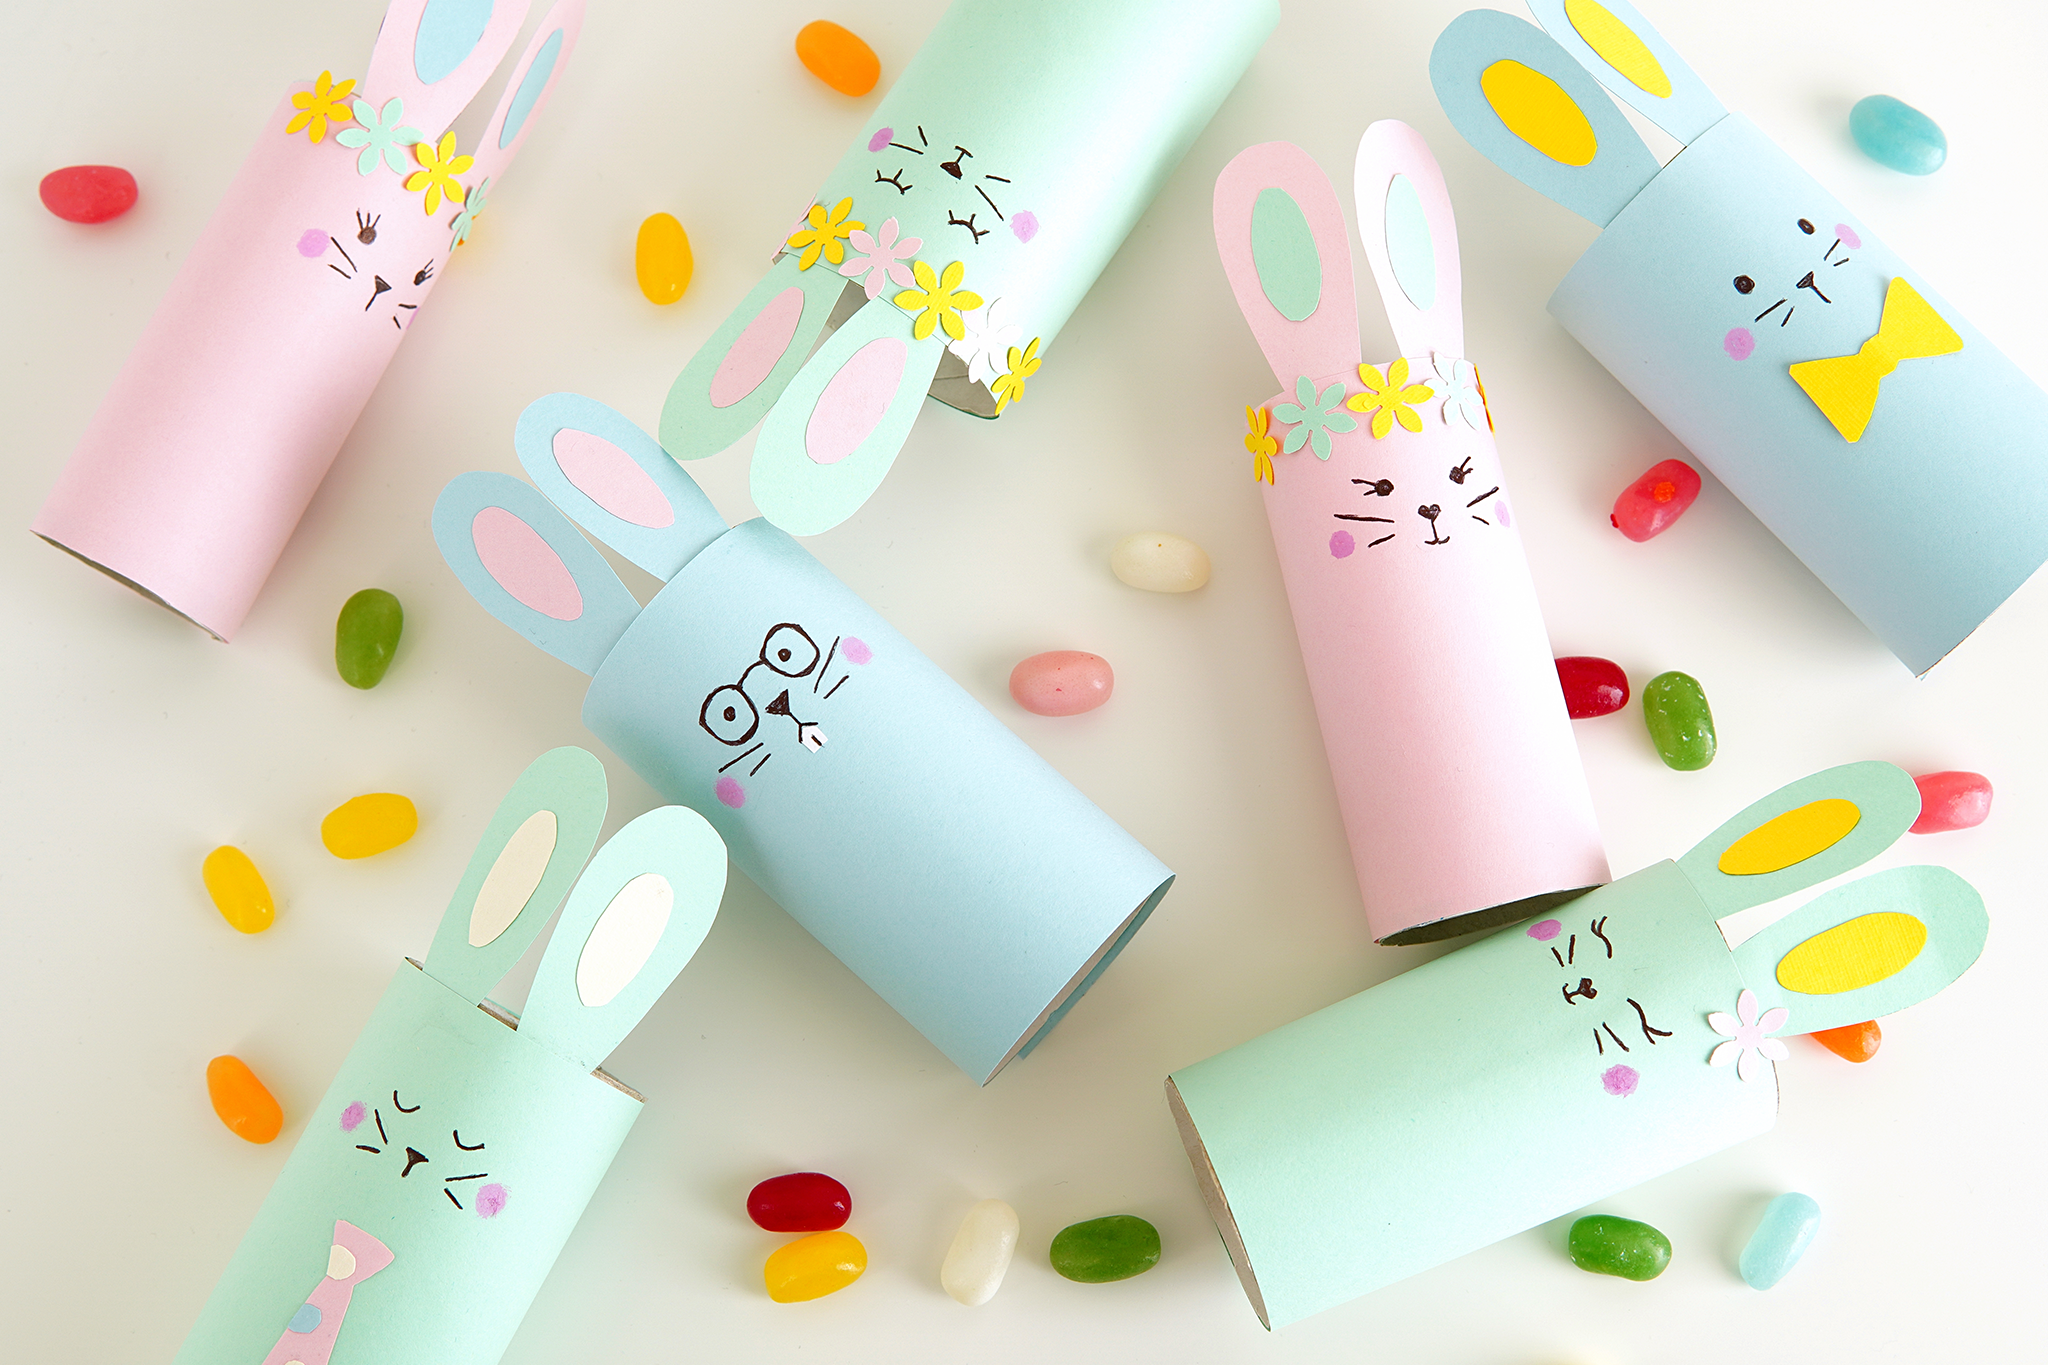 Staying home for Easter? Here’s some egg-citing ideas for the whole family!